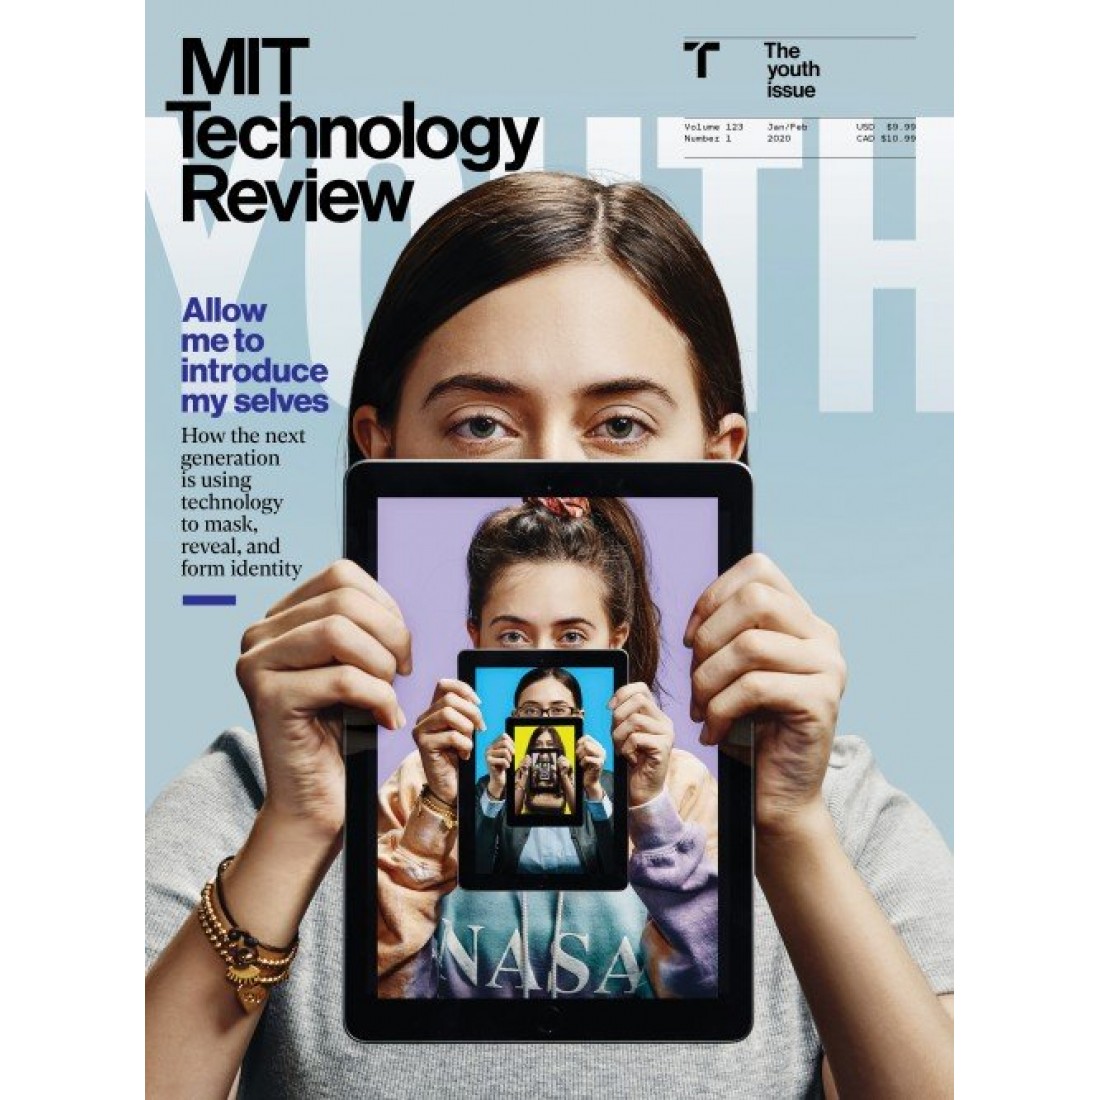 MIT Technology Review Magazine Subscriber Services